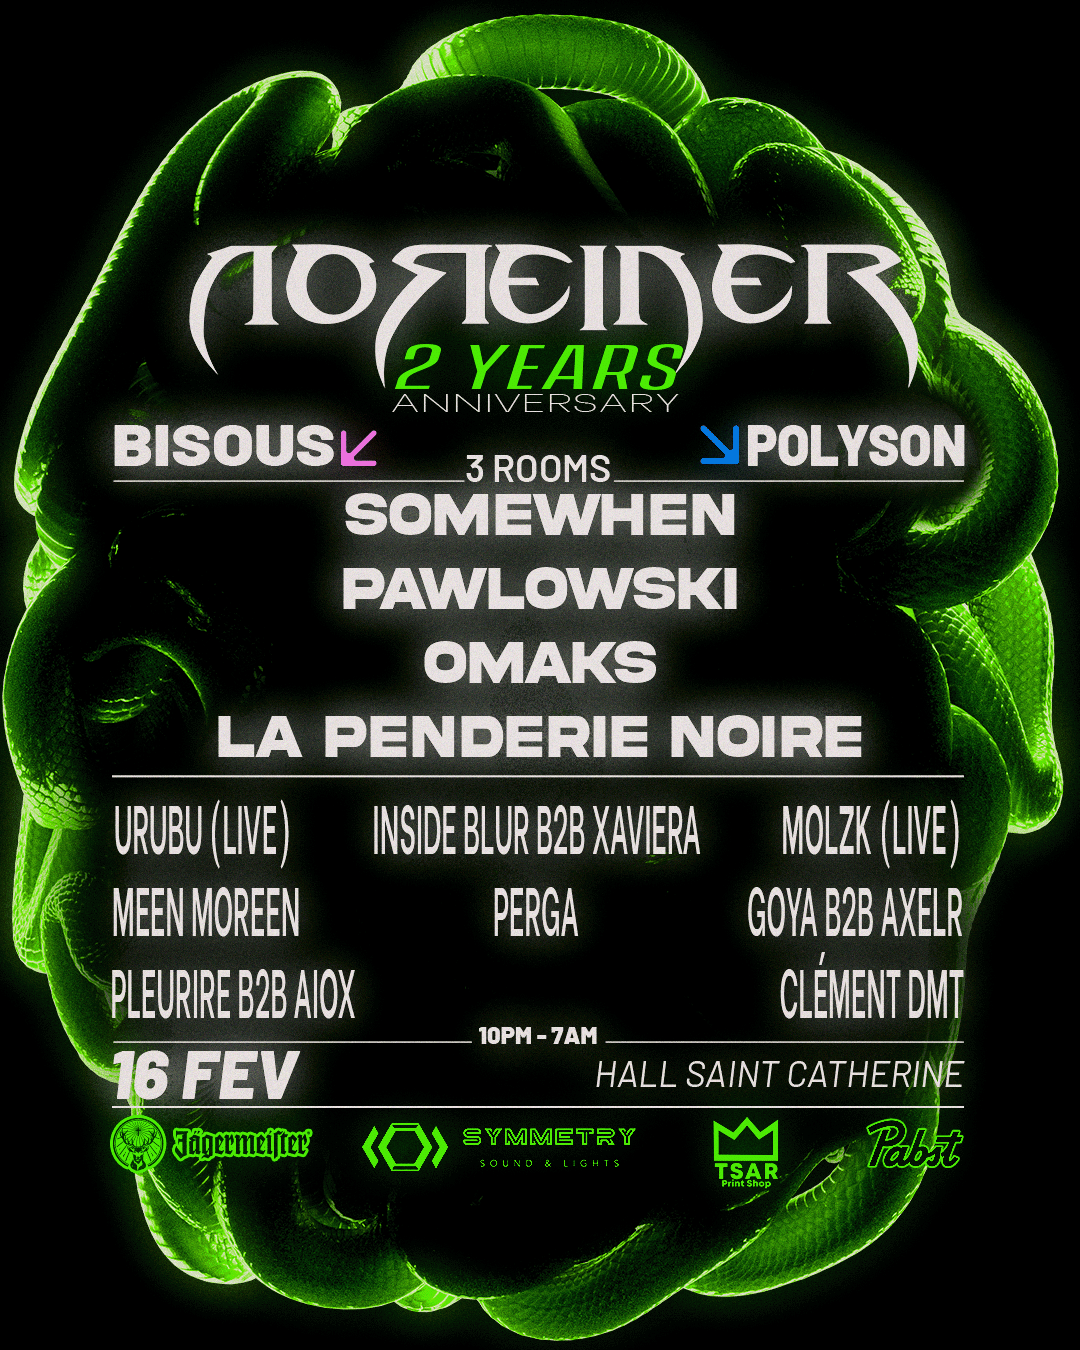 Noreiner 2 Years W/ Bisous & Poly'son - 3 Rooms all night long Rave - Página frontal